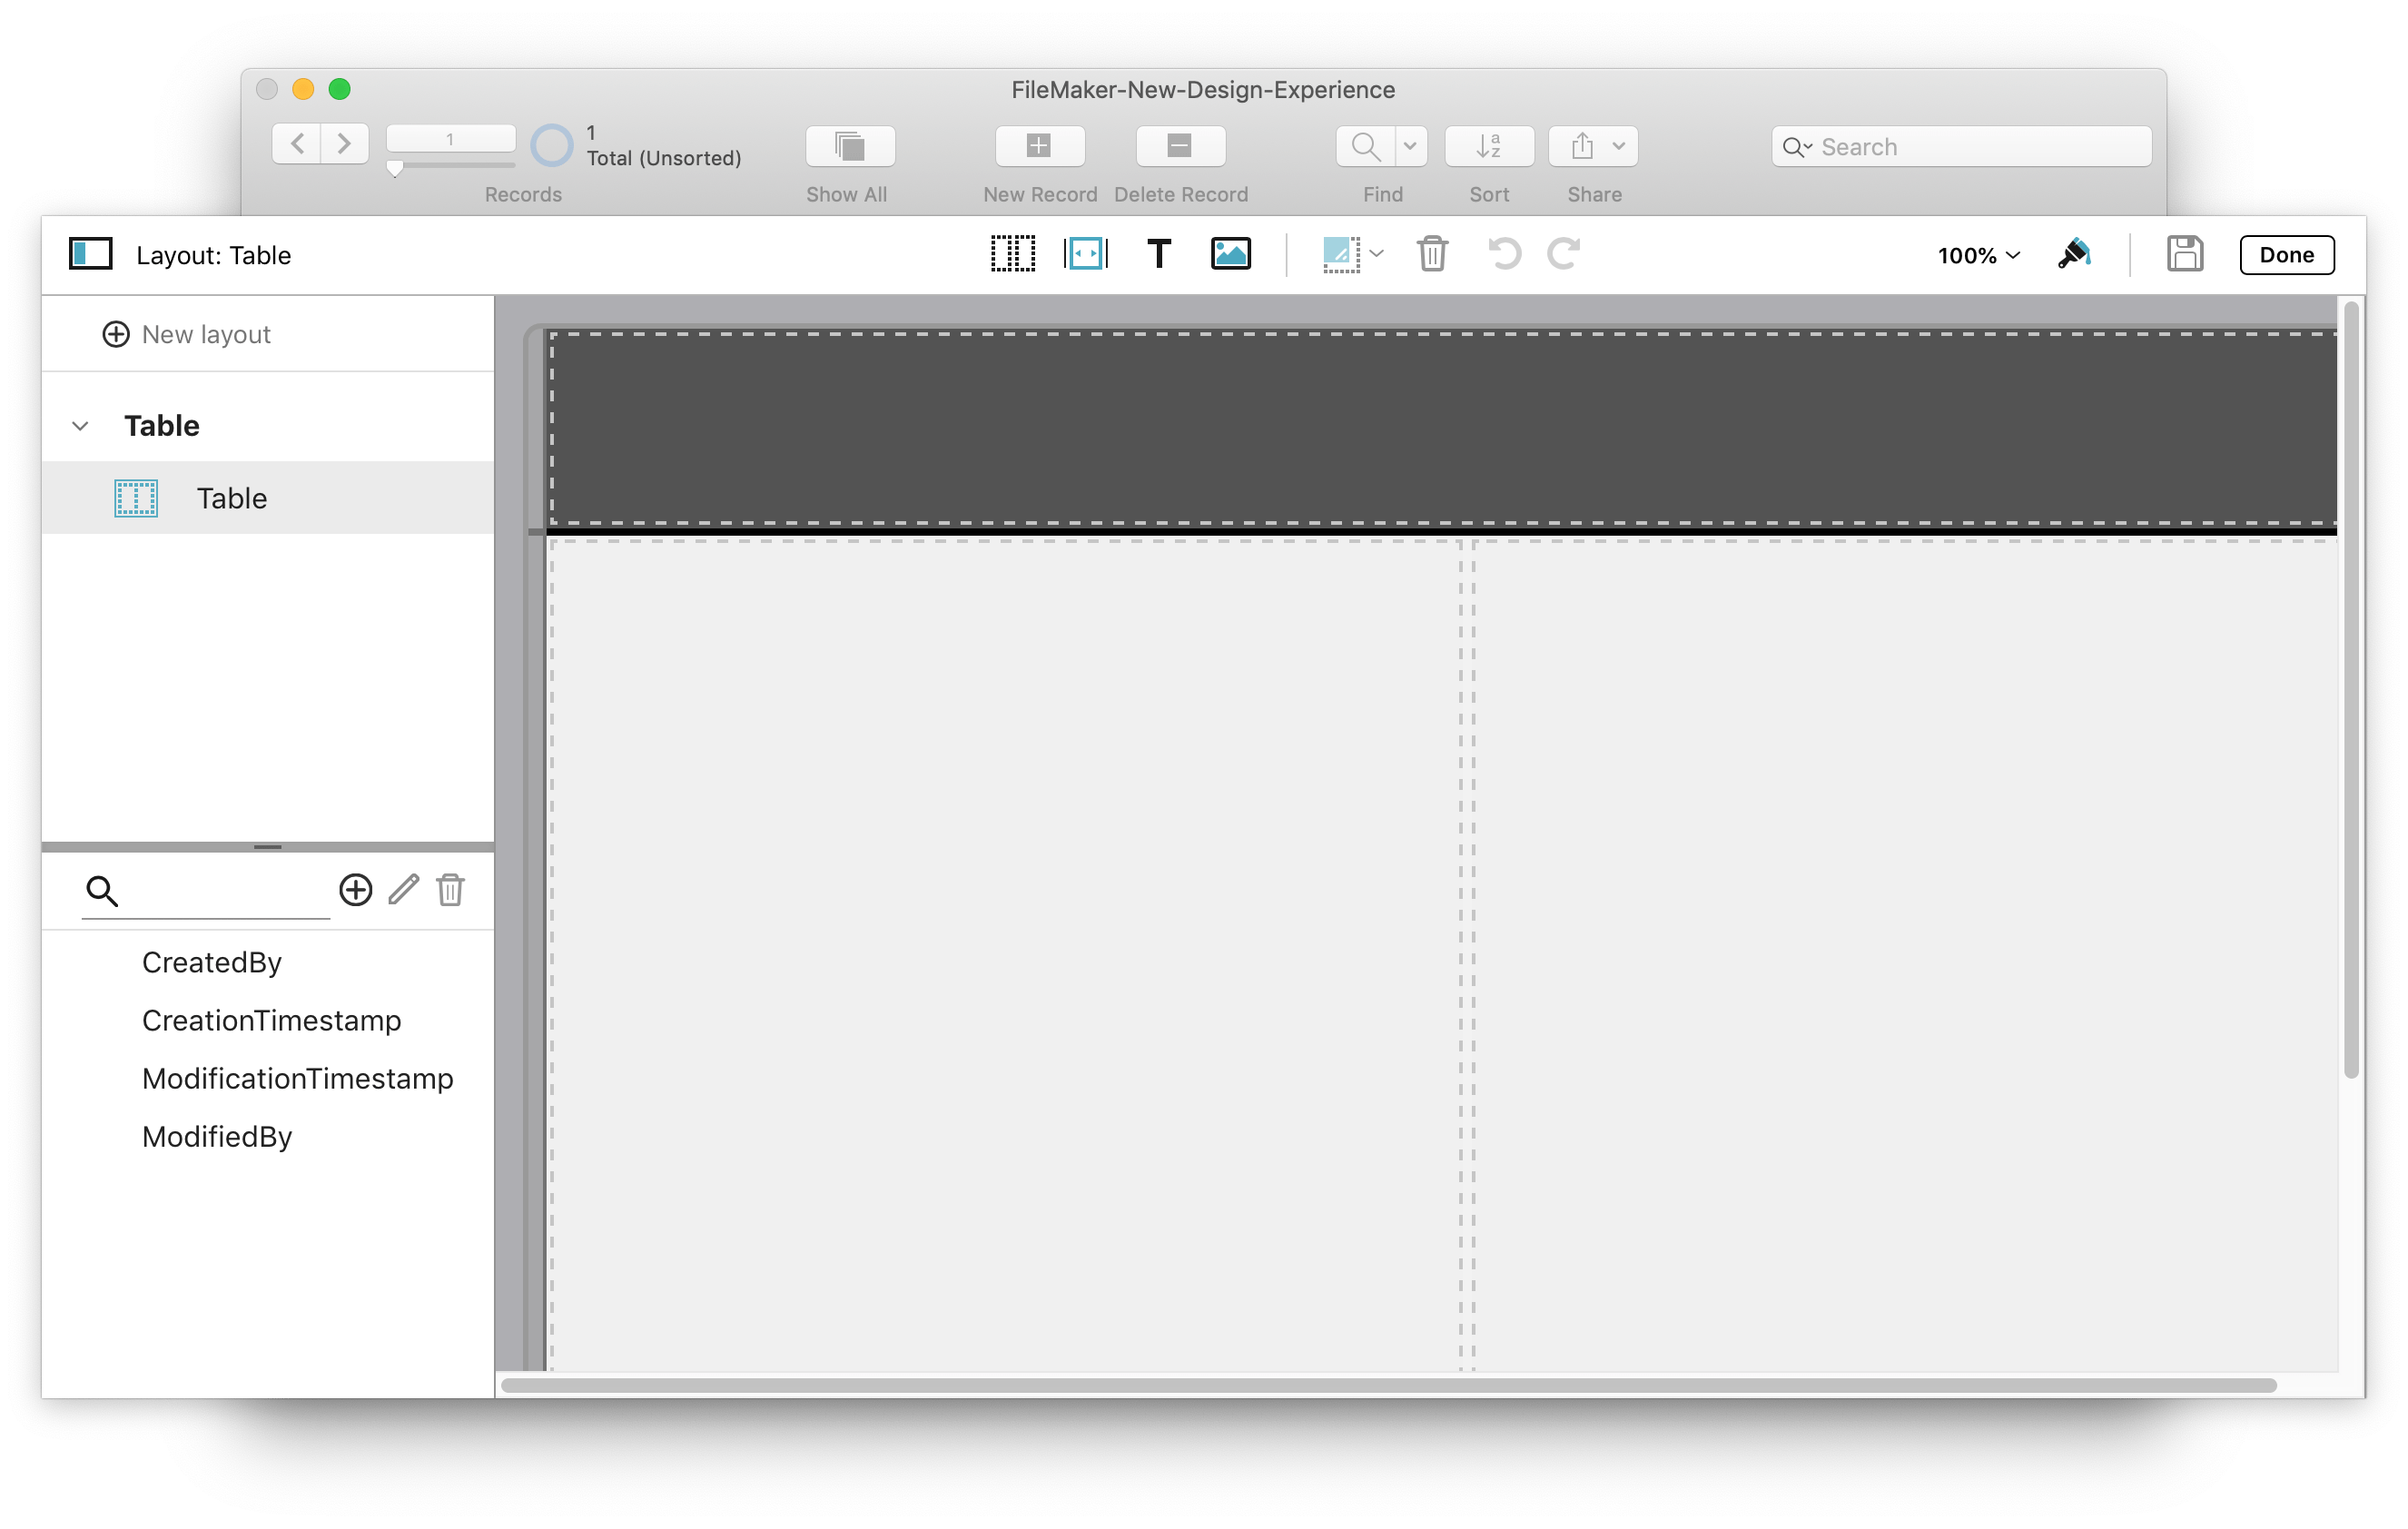 FileMaker New Layout Design Experience